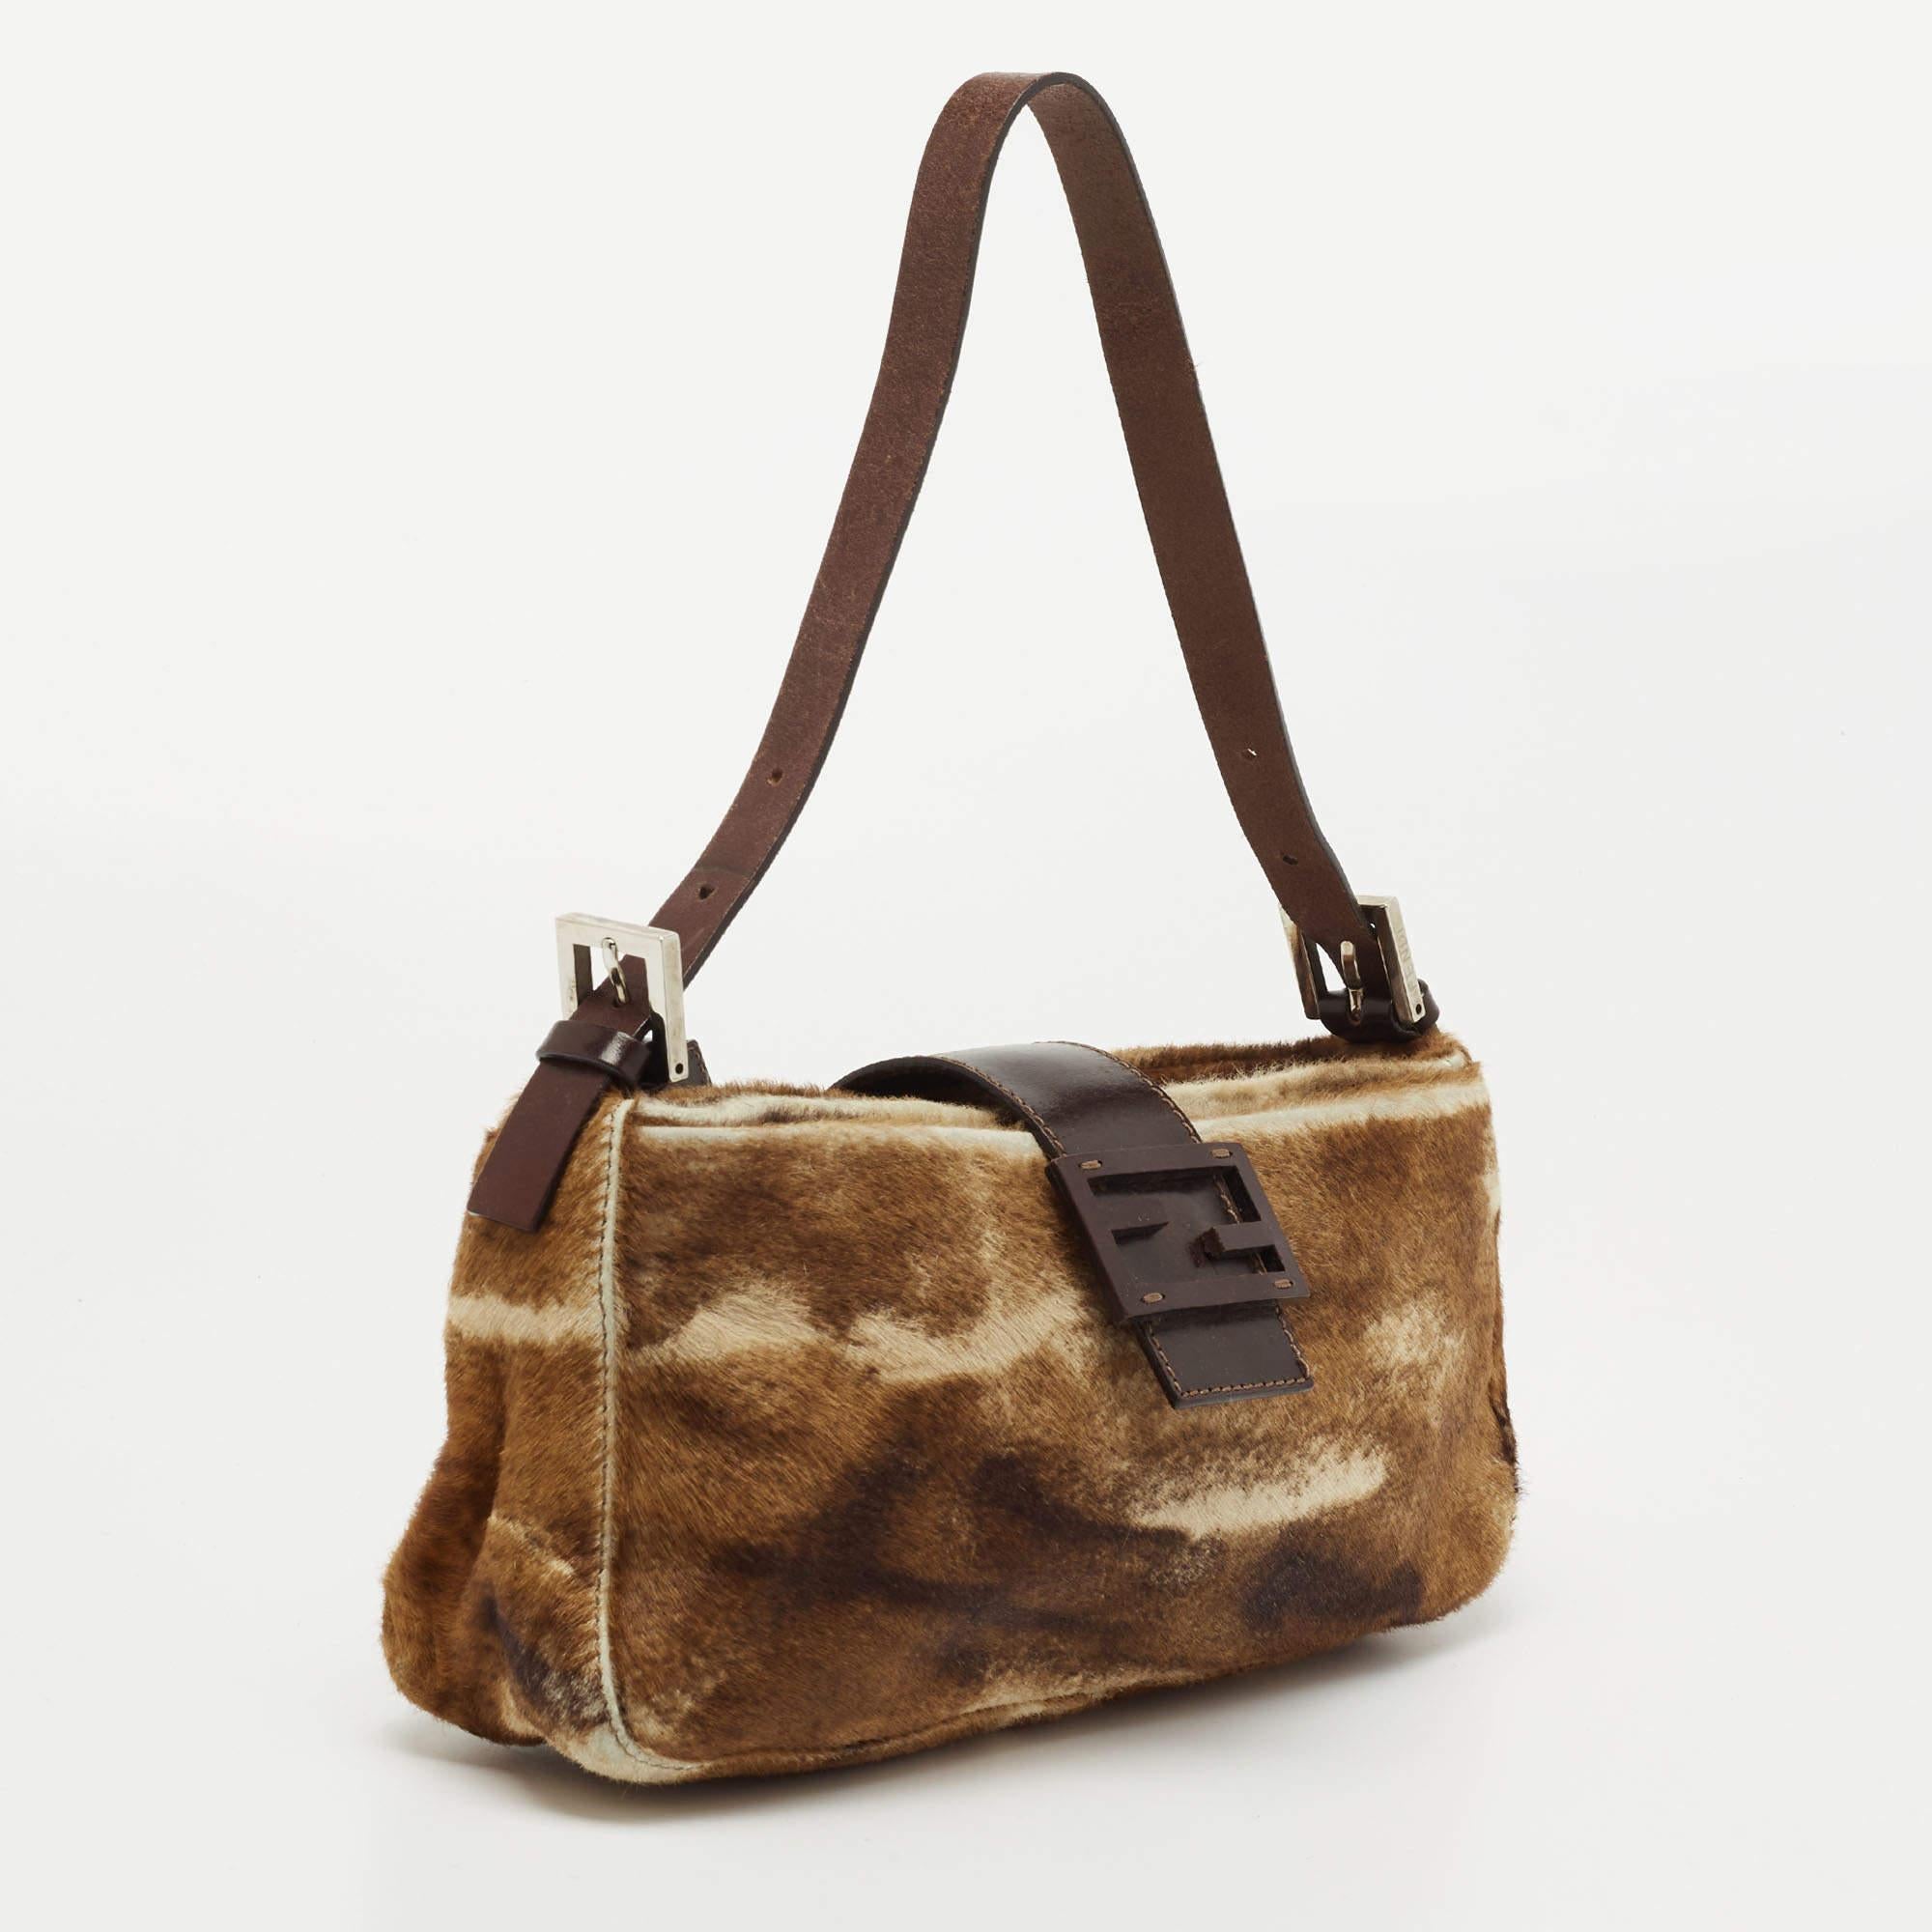 Women's Fendi Brown/Beige Calfhair and Leather Baguette Bag